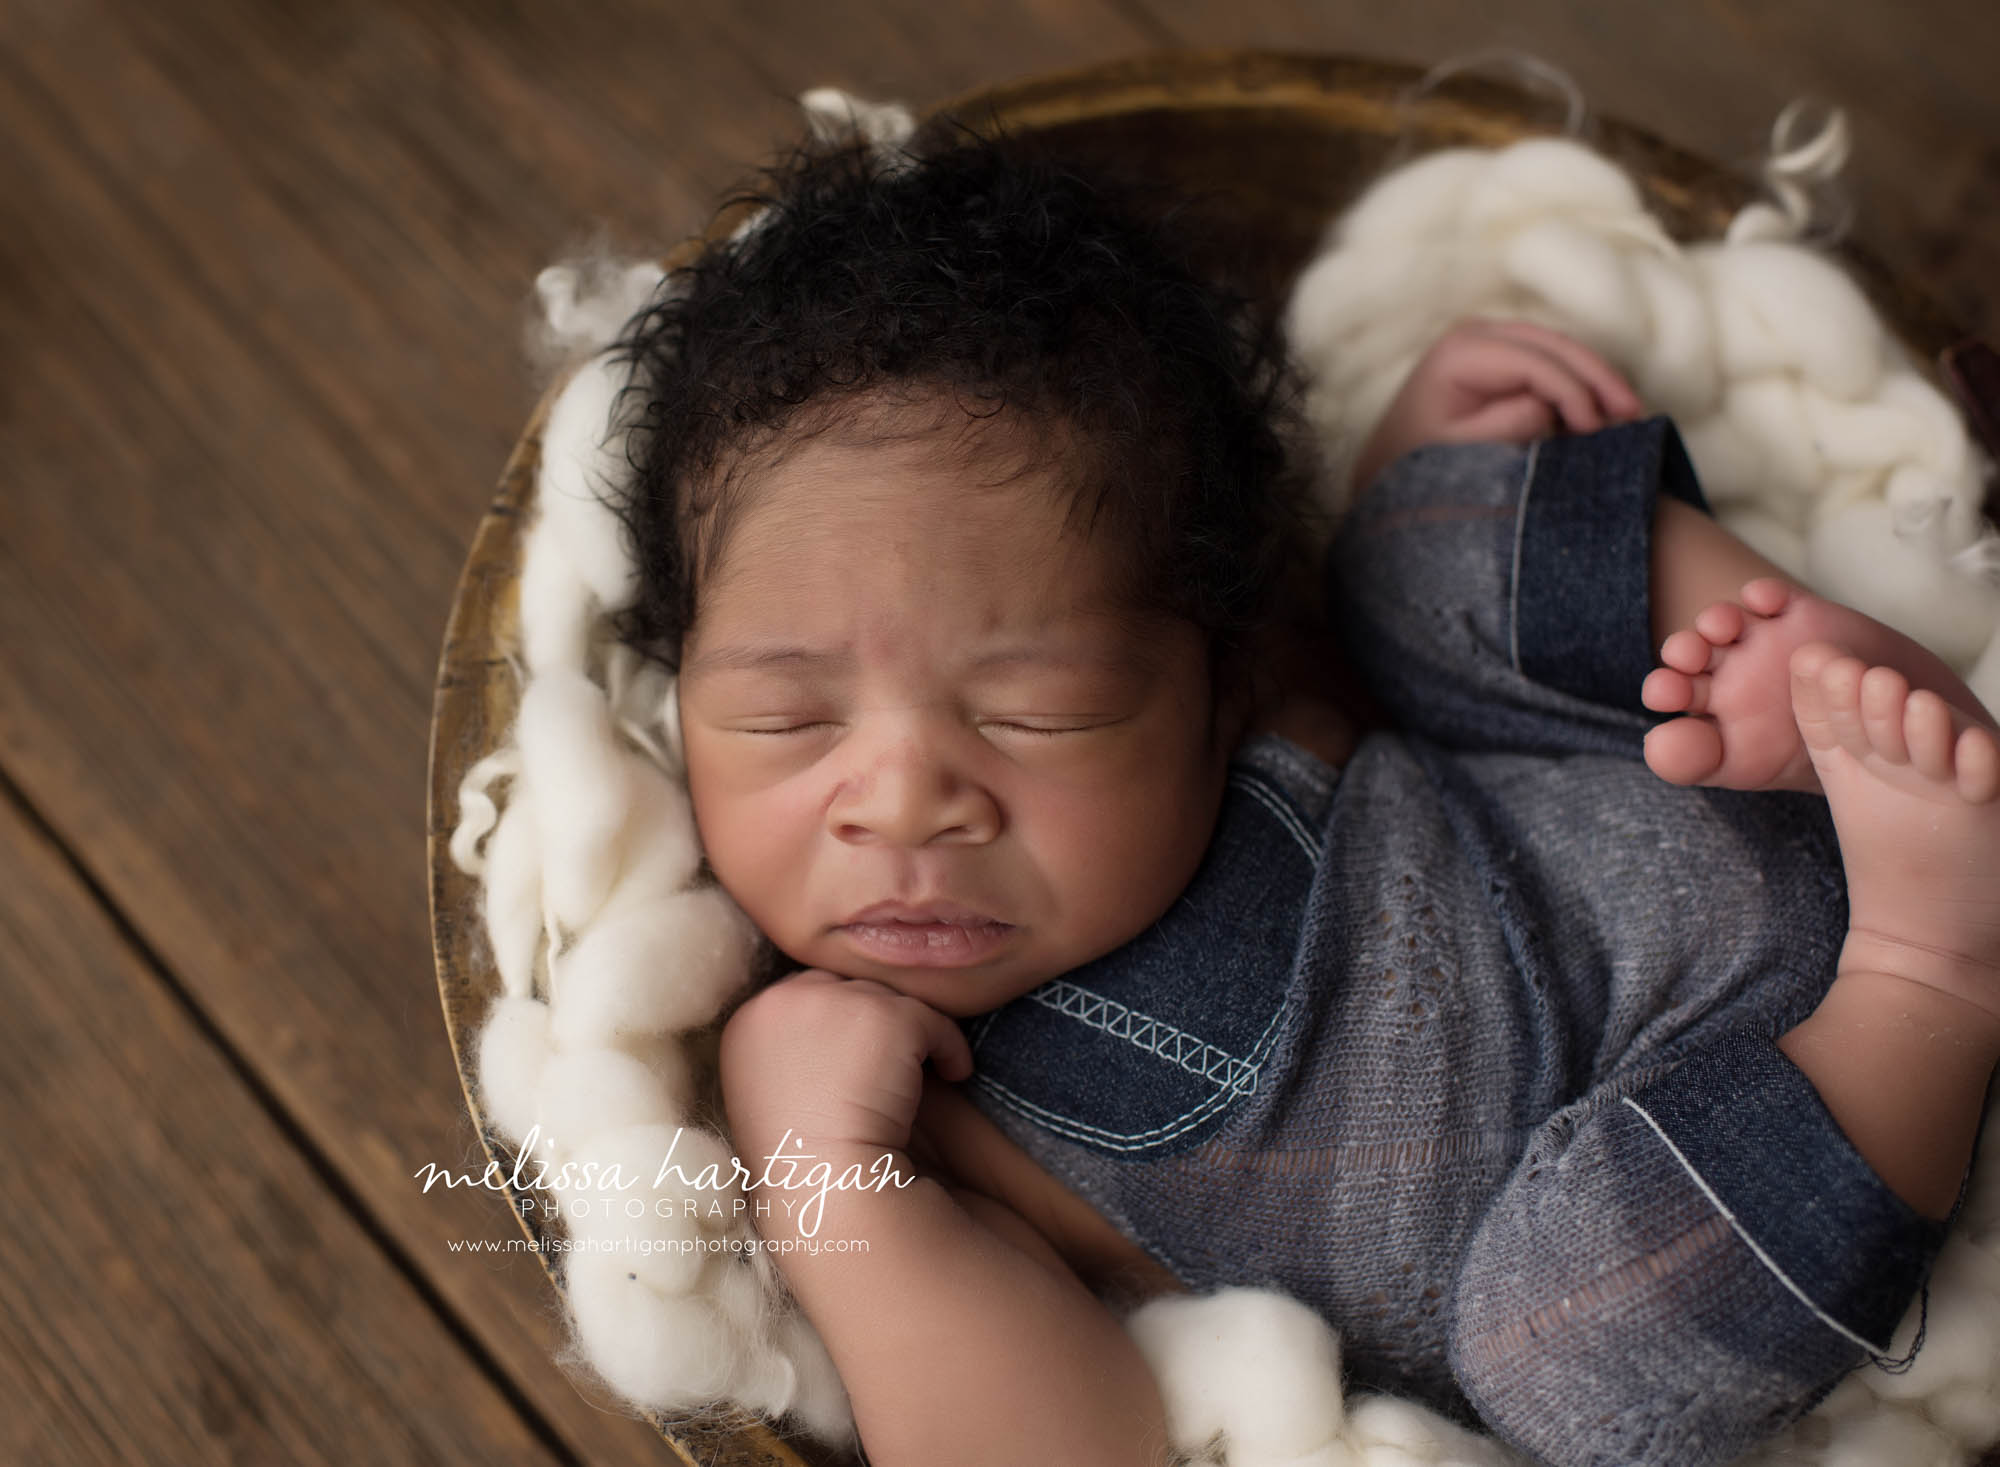 Melissa Hartigan Photography Connecticut Maternity and Newborn CT Photographer Coventry Ct Middlefield CT baby Fairfield county Newborn pose baby boy sleeping in wooden bowl with ivory chunky knitted blanket wearing blue knitted overalls